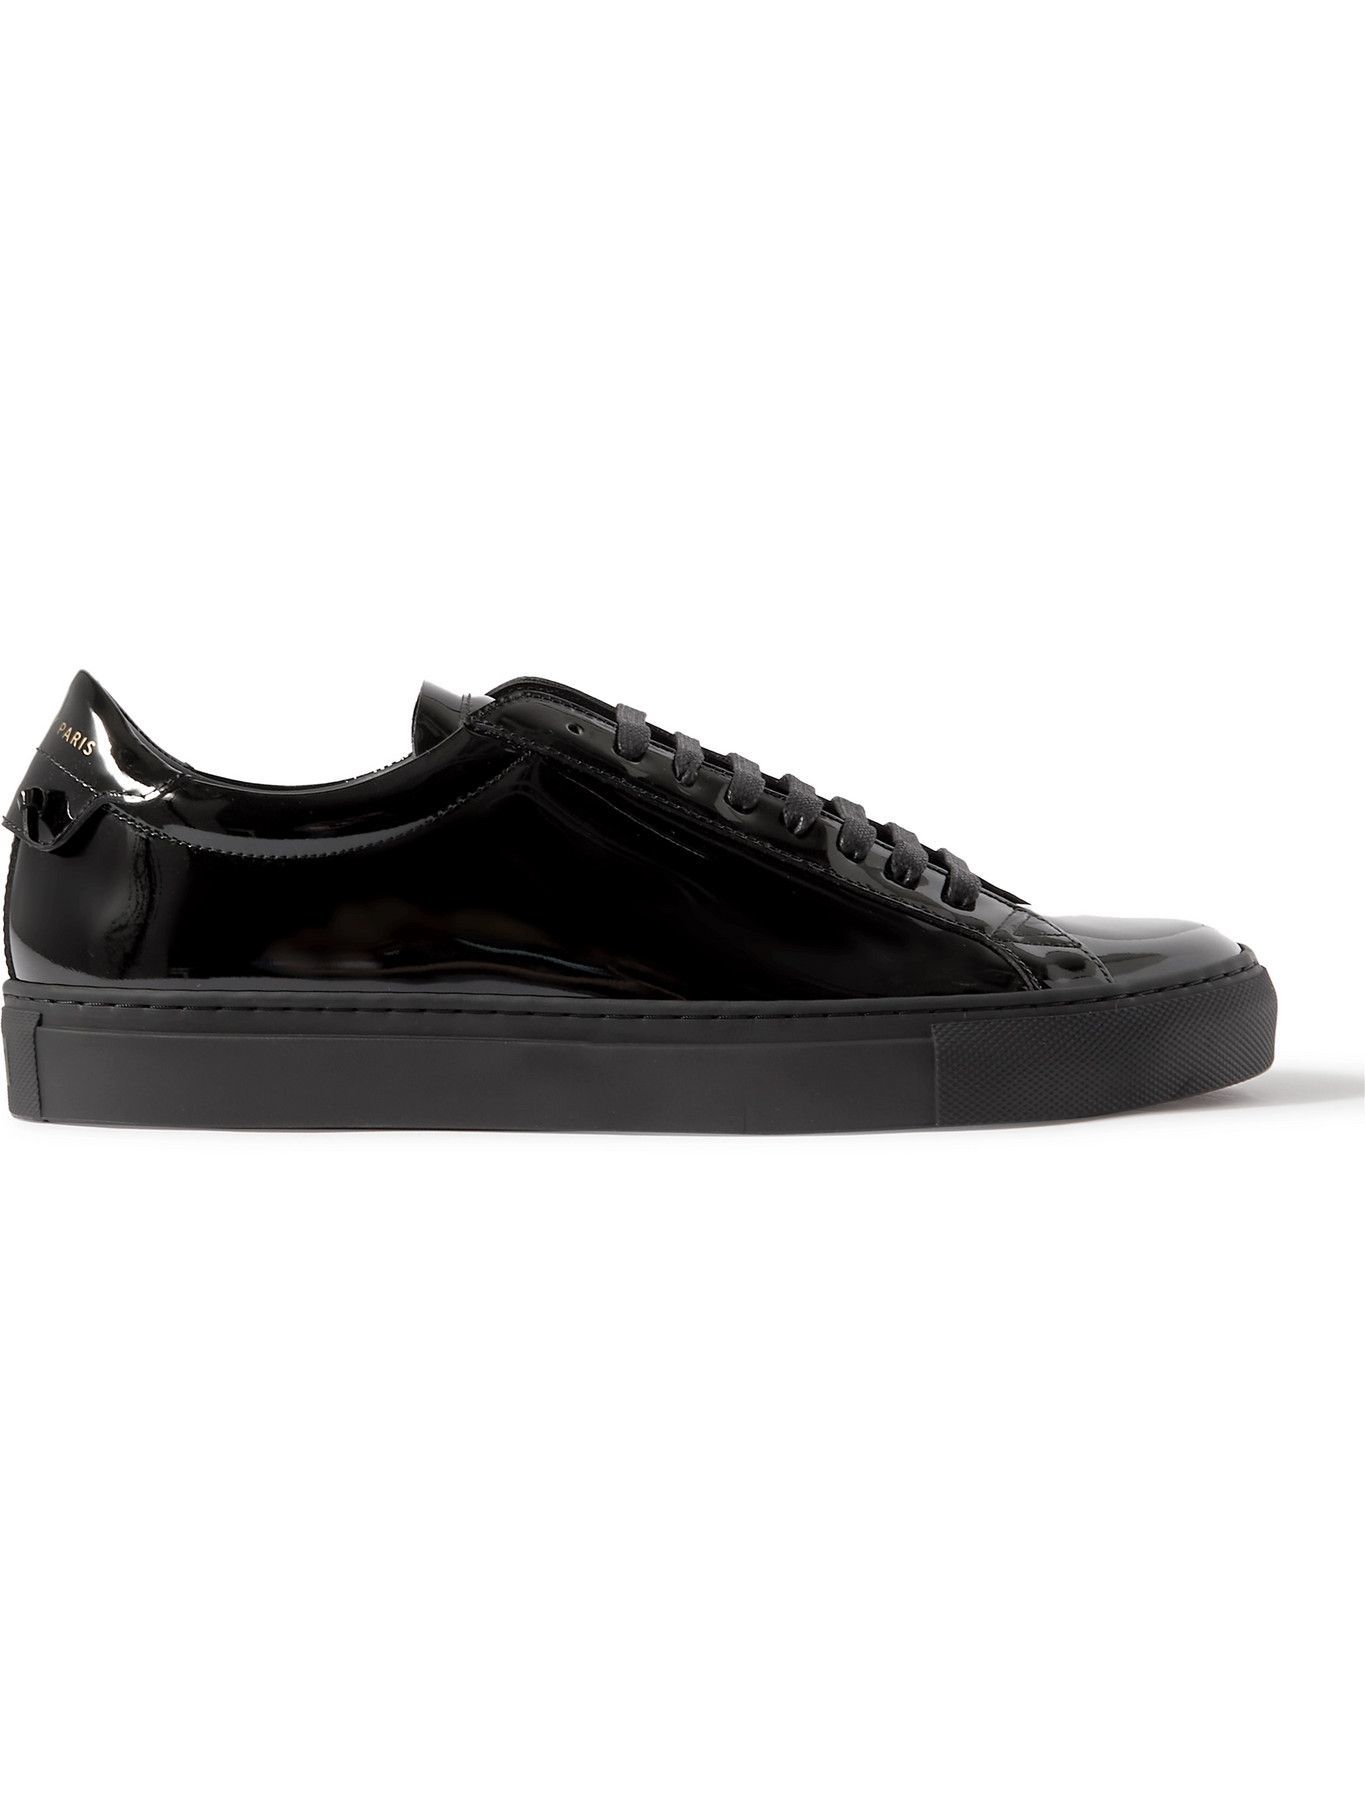 GIVENCHY - Urban Street Patent-Leather Sneakers - Black Givenchy